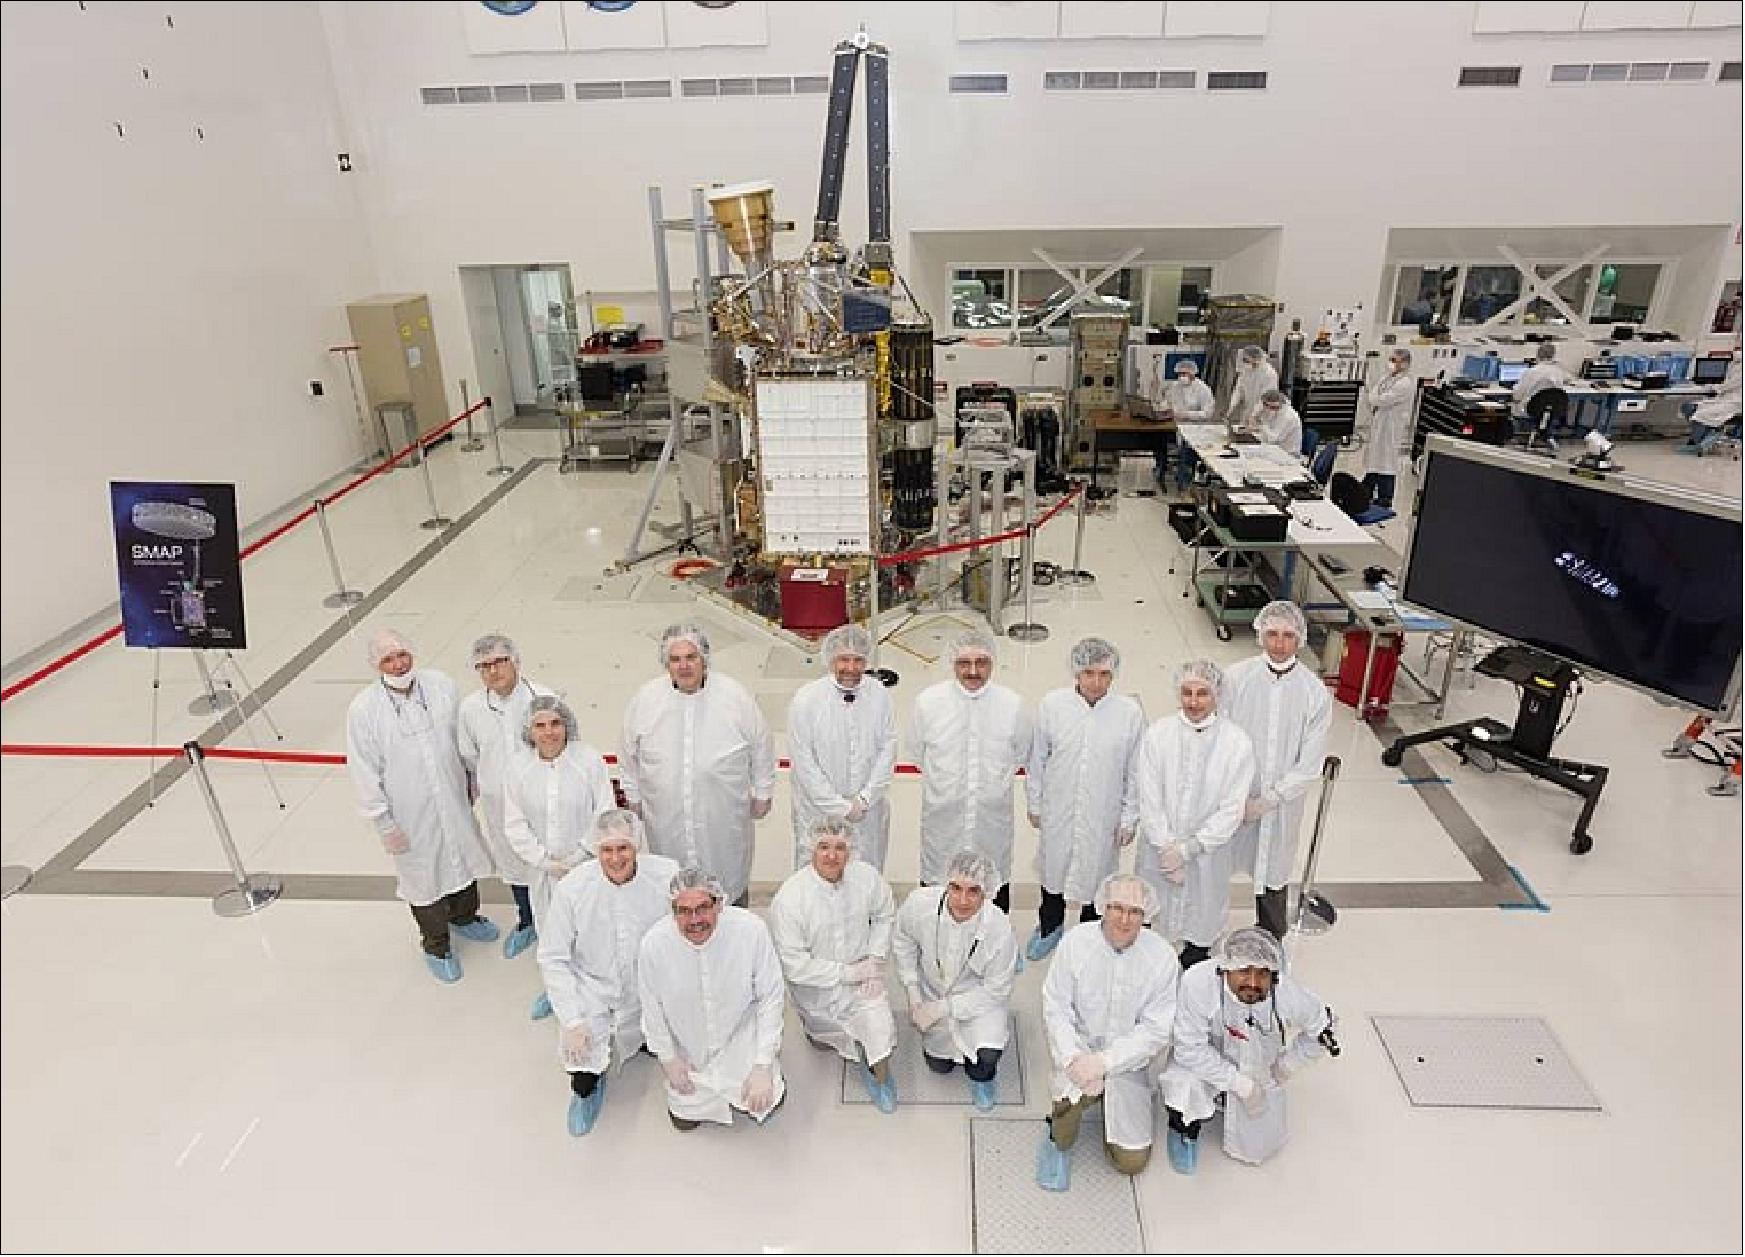 Figure 8: Photo of the SMAP leadership and test team members in cleanroom garb appear with the Spacecraft and Instrument in the background (image credit: NASA)